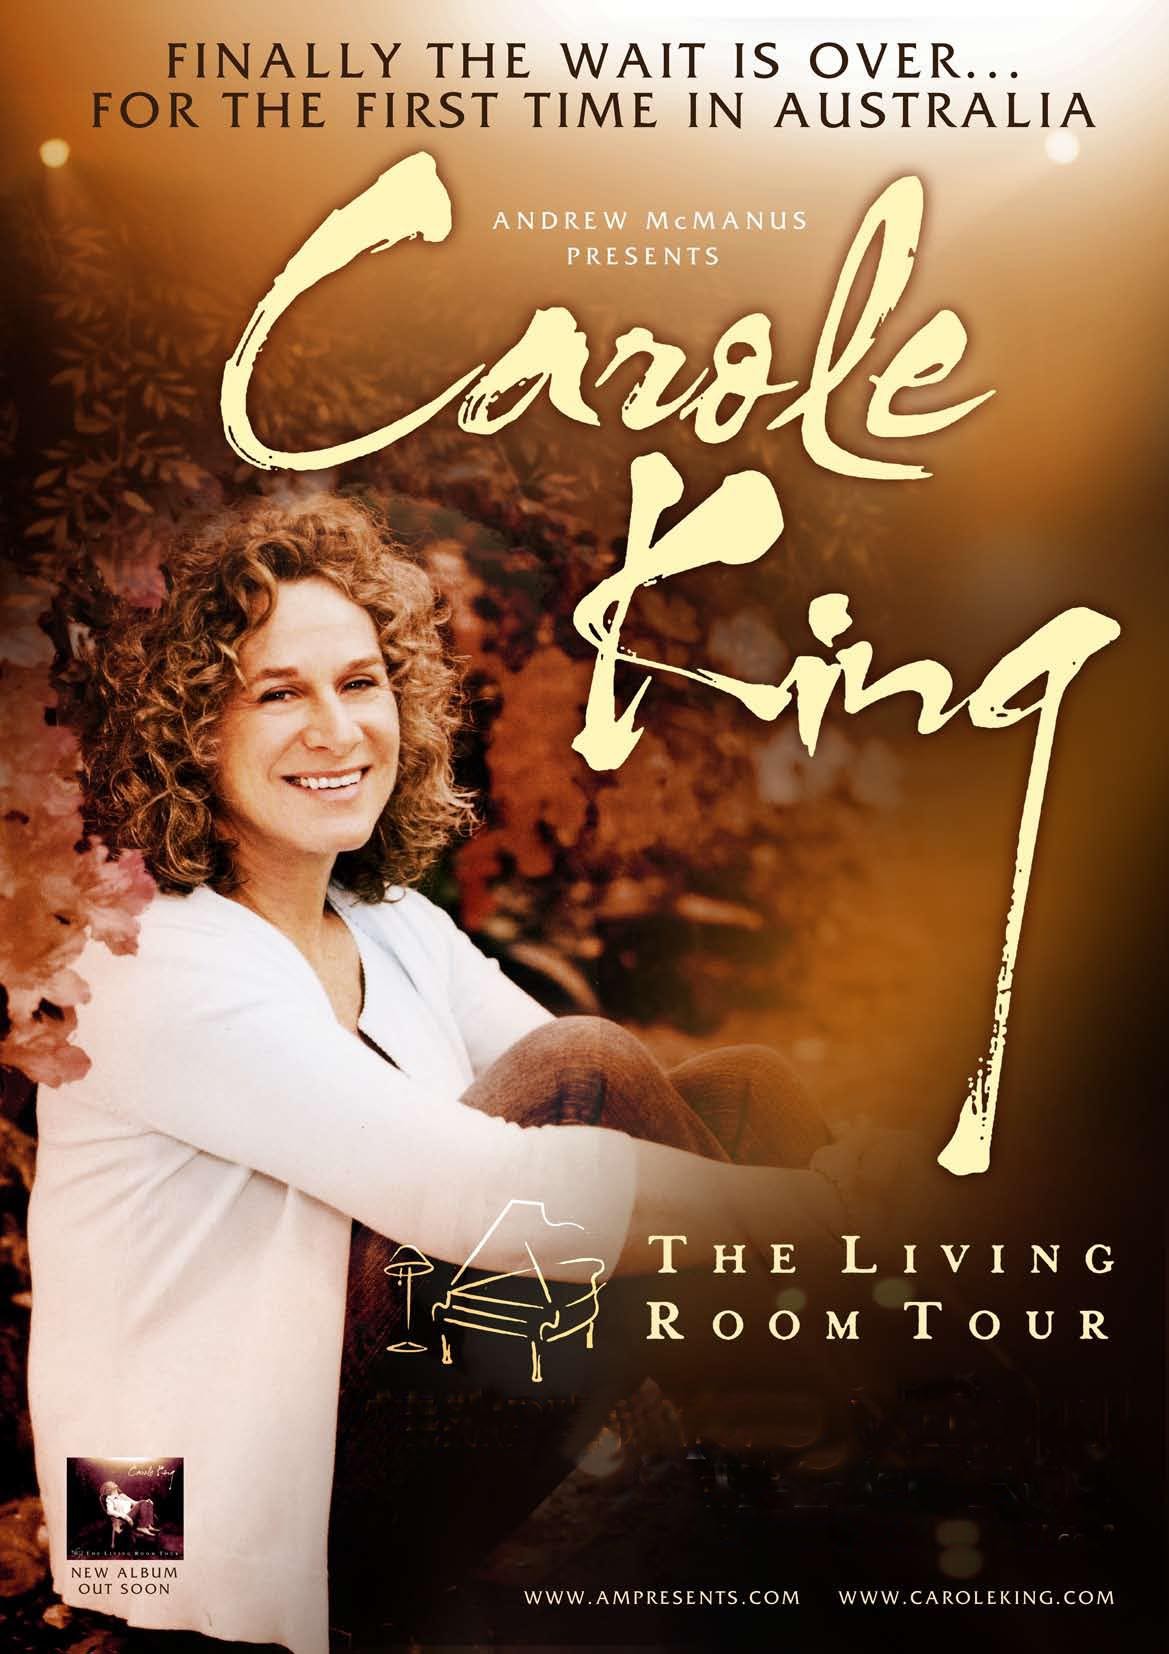 Carole King's The 'Living Room Tour' Receives Rave Reviews Down Under